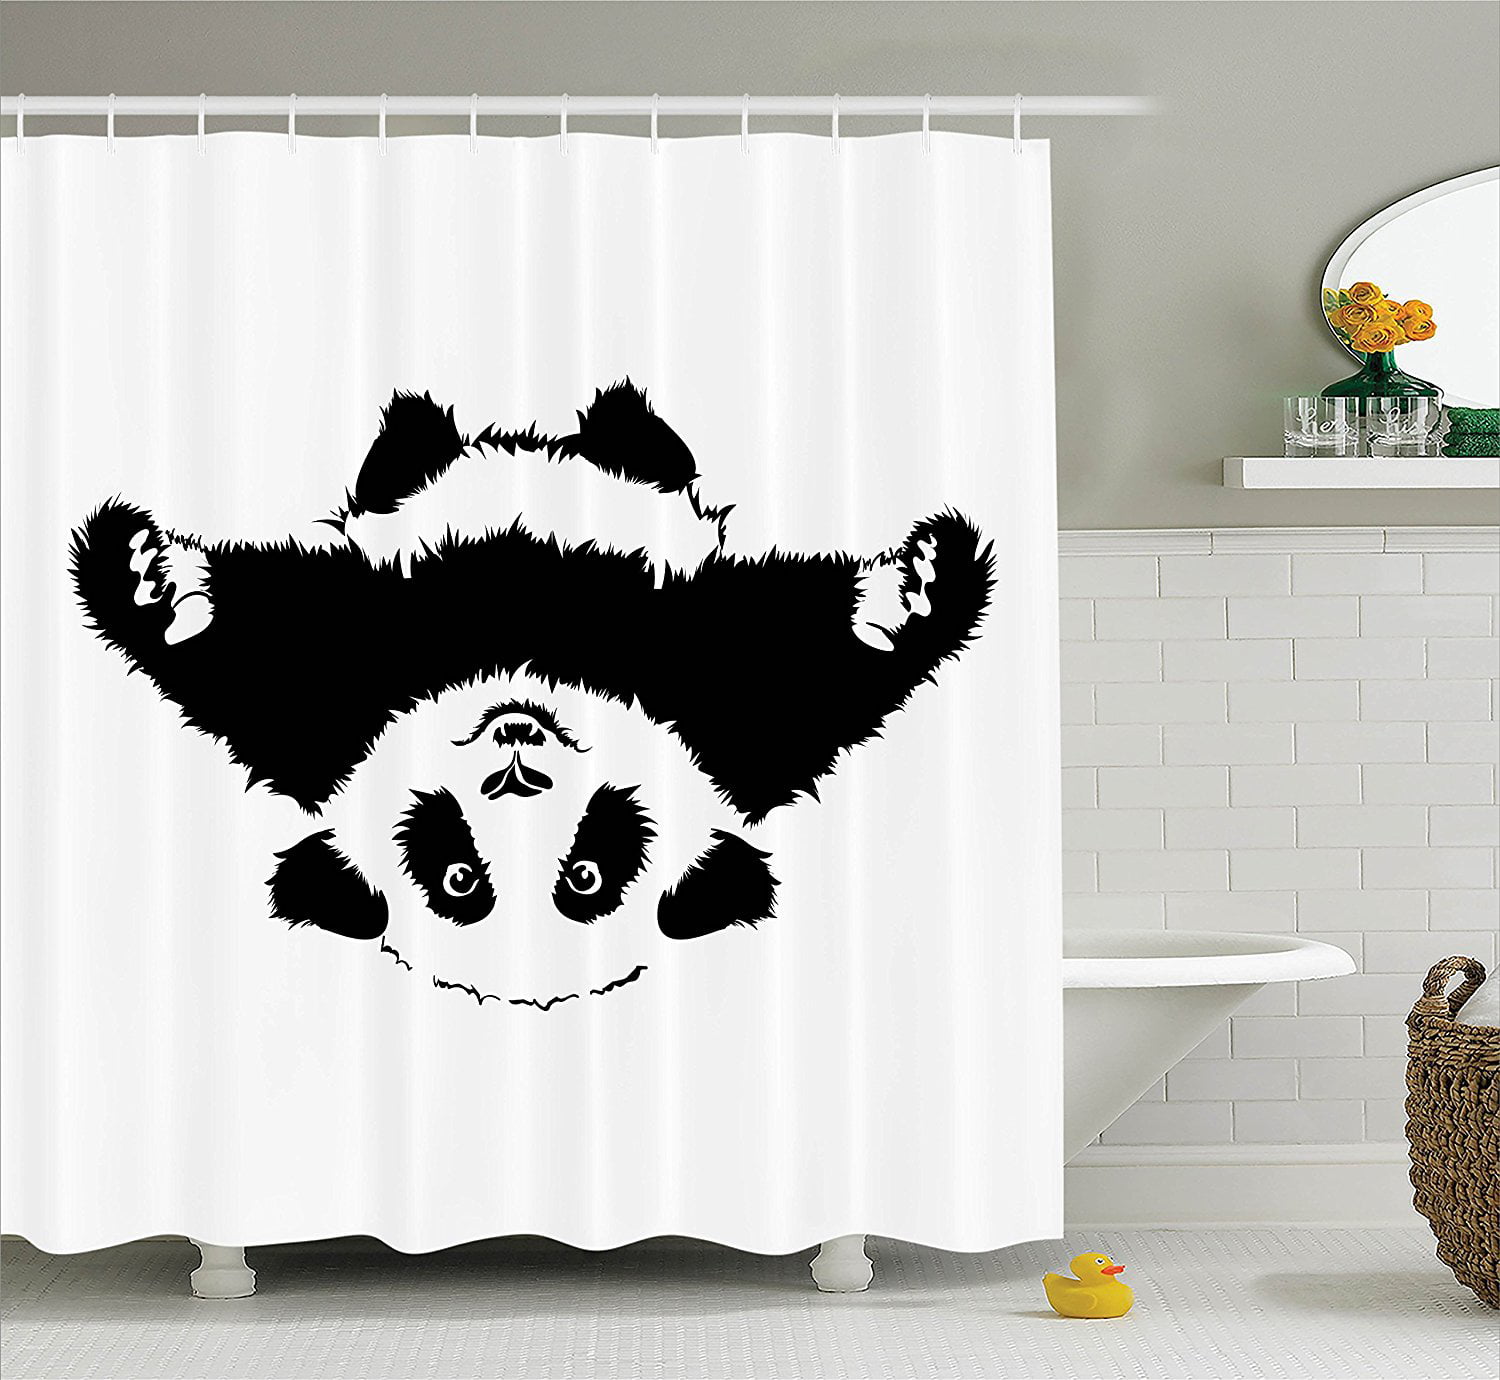 Details about   Curtain Waterproof Shower Curtains Polyester Cartoon Bath Screen Printed Curtain 